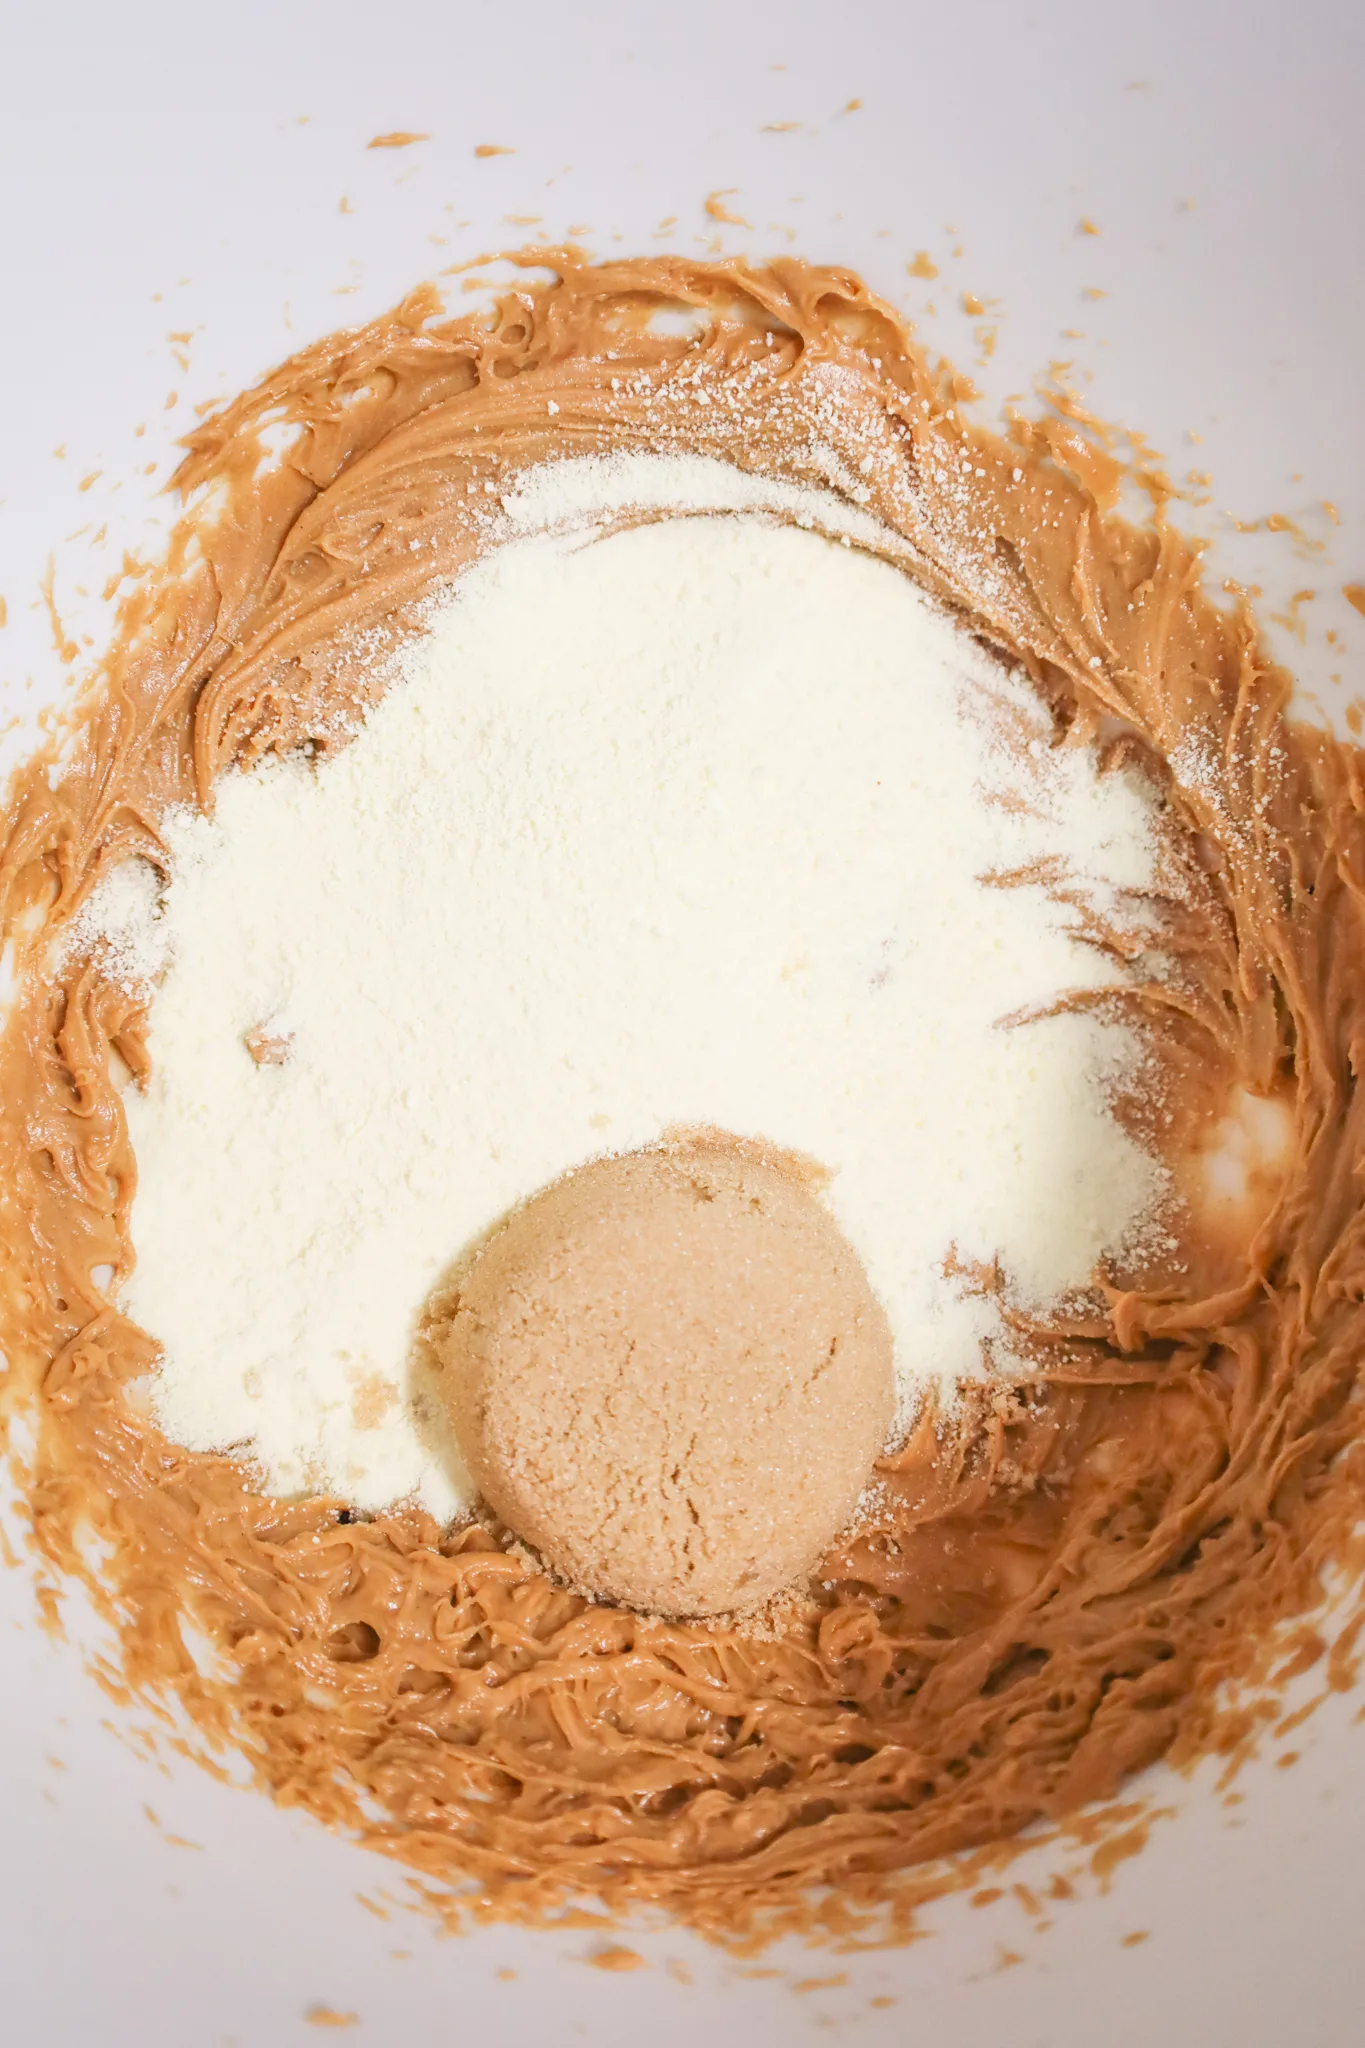 powdered milk, brown sugar and peanut butter mixture in mixing bowl